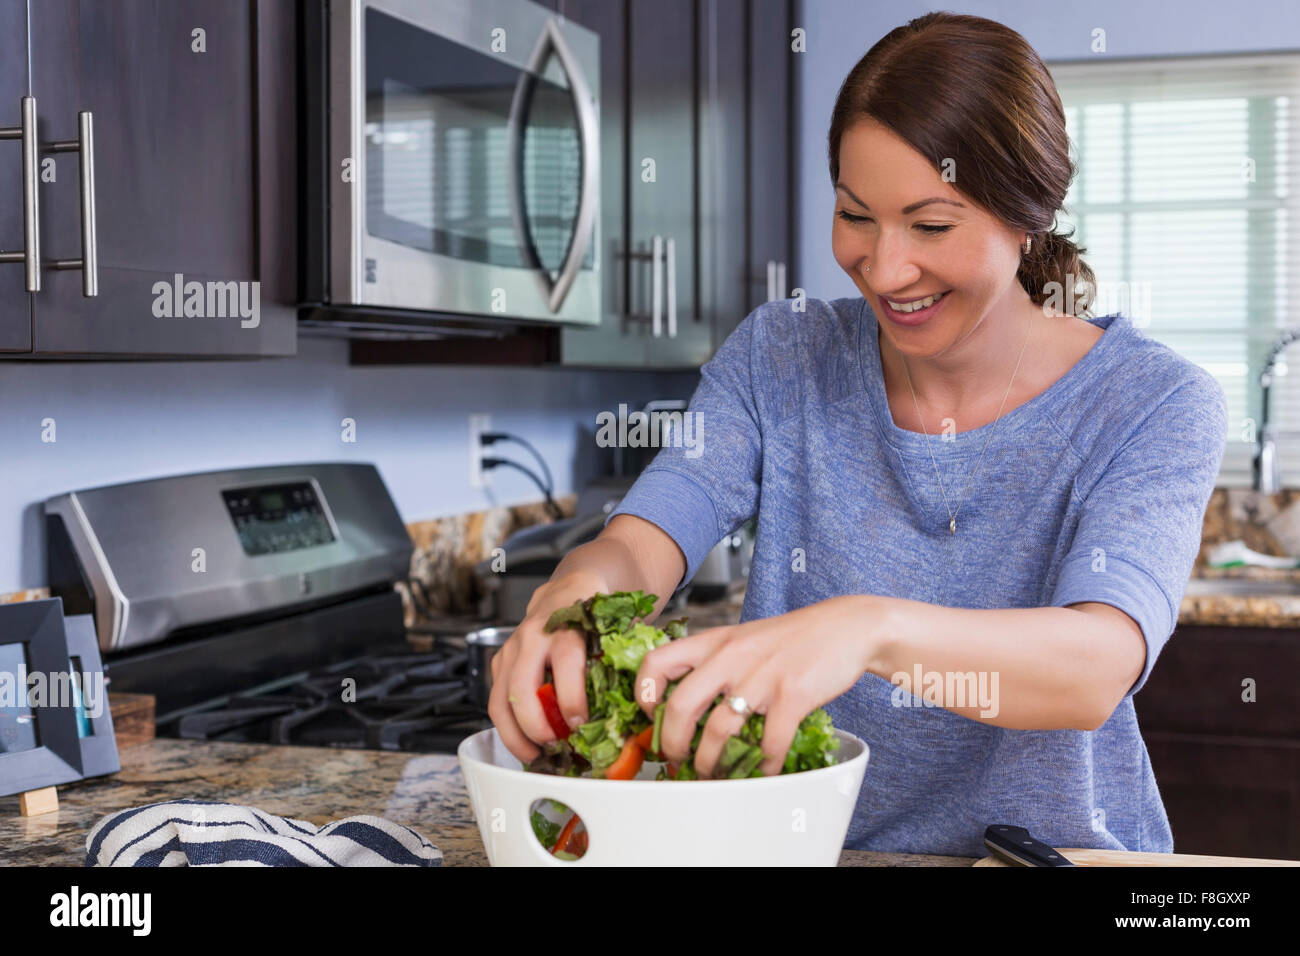 Mixed race woman tossing salad in kitchen Stock Photo